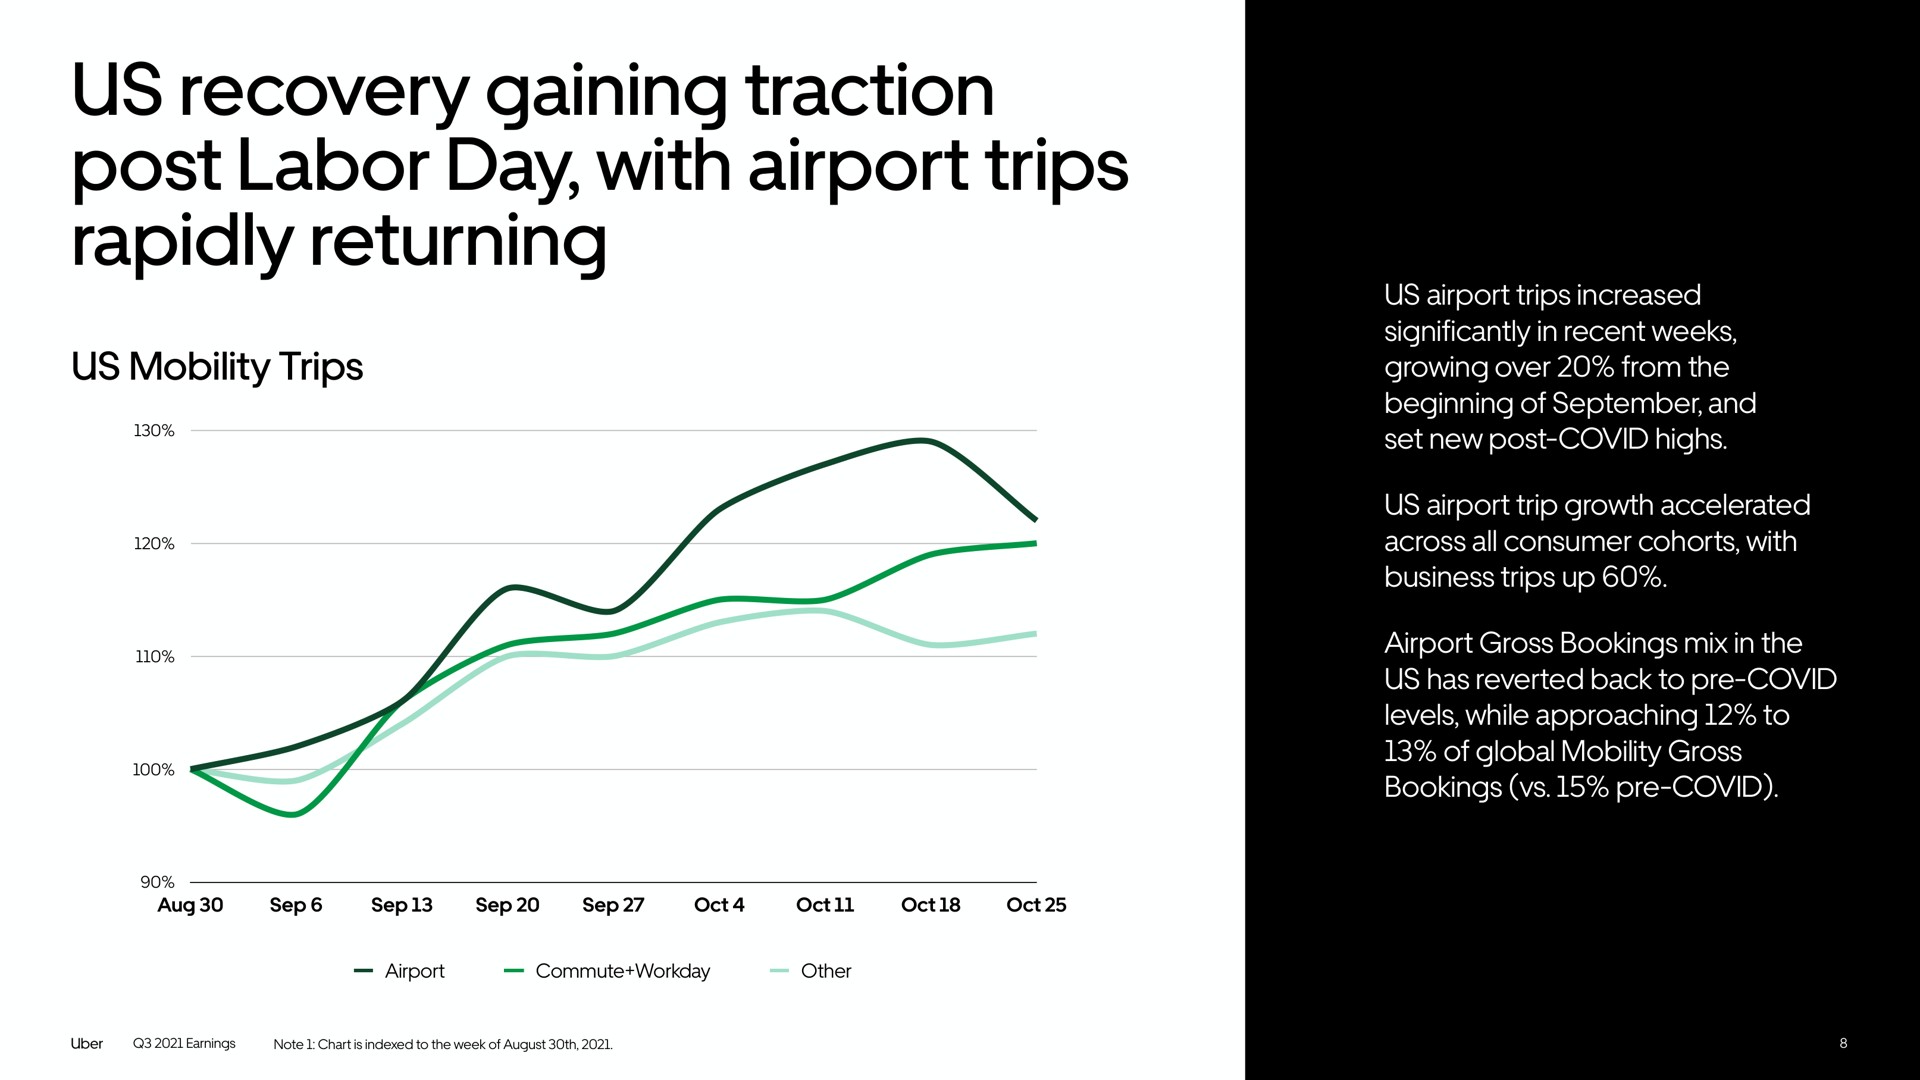 us recovery gaining traction post labor day with airport trips rapidly returning | Uber